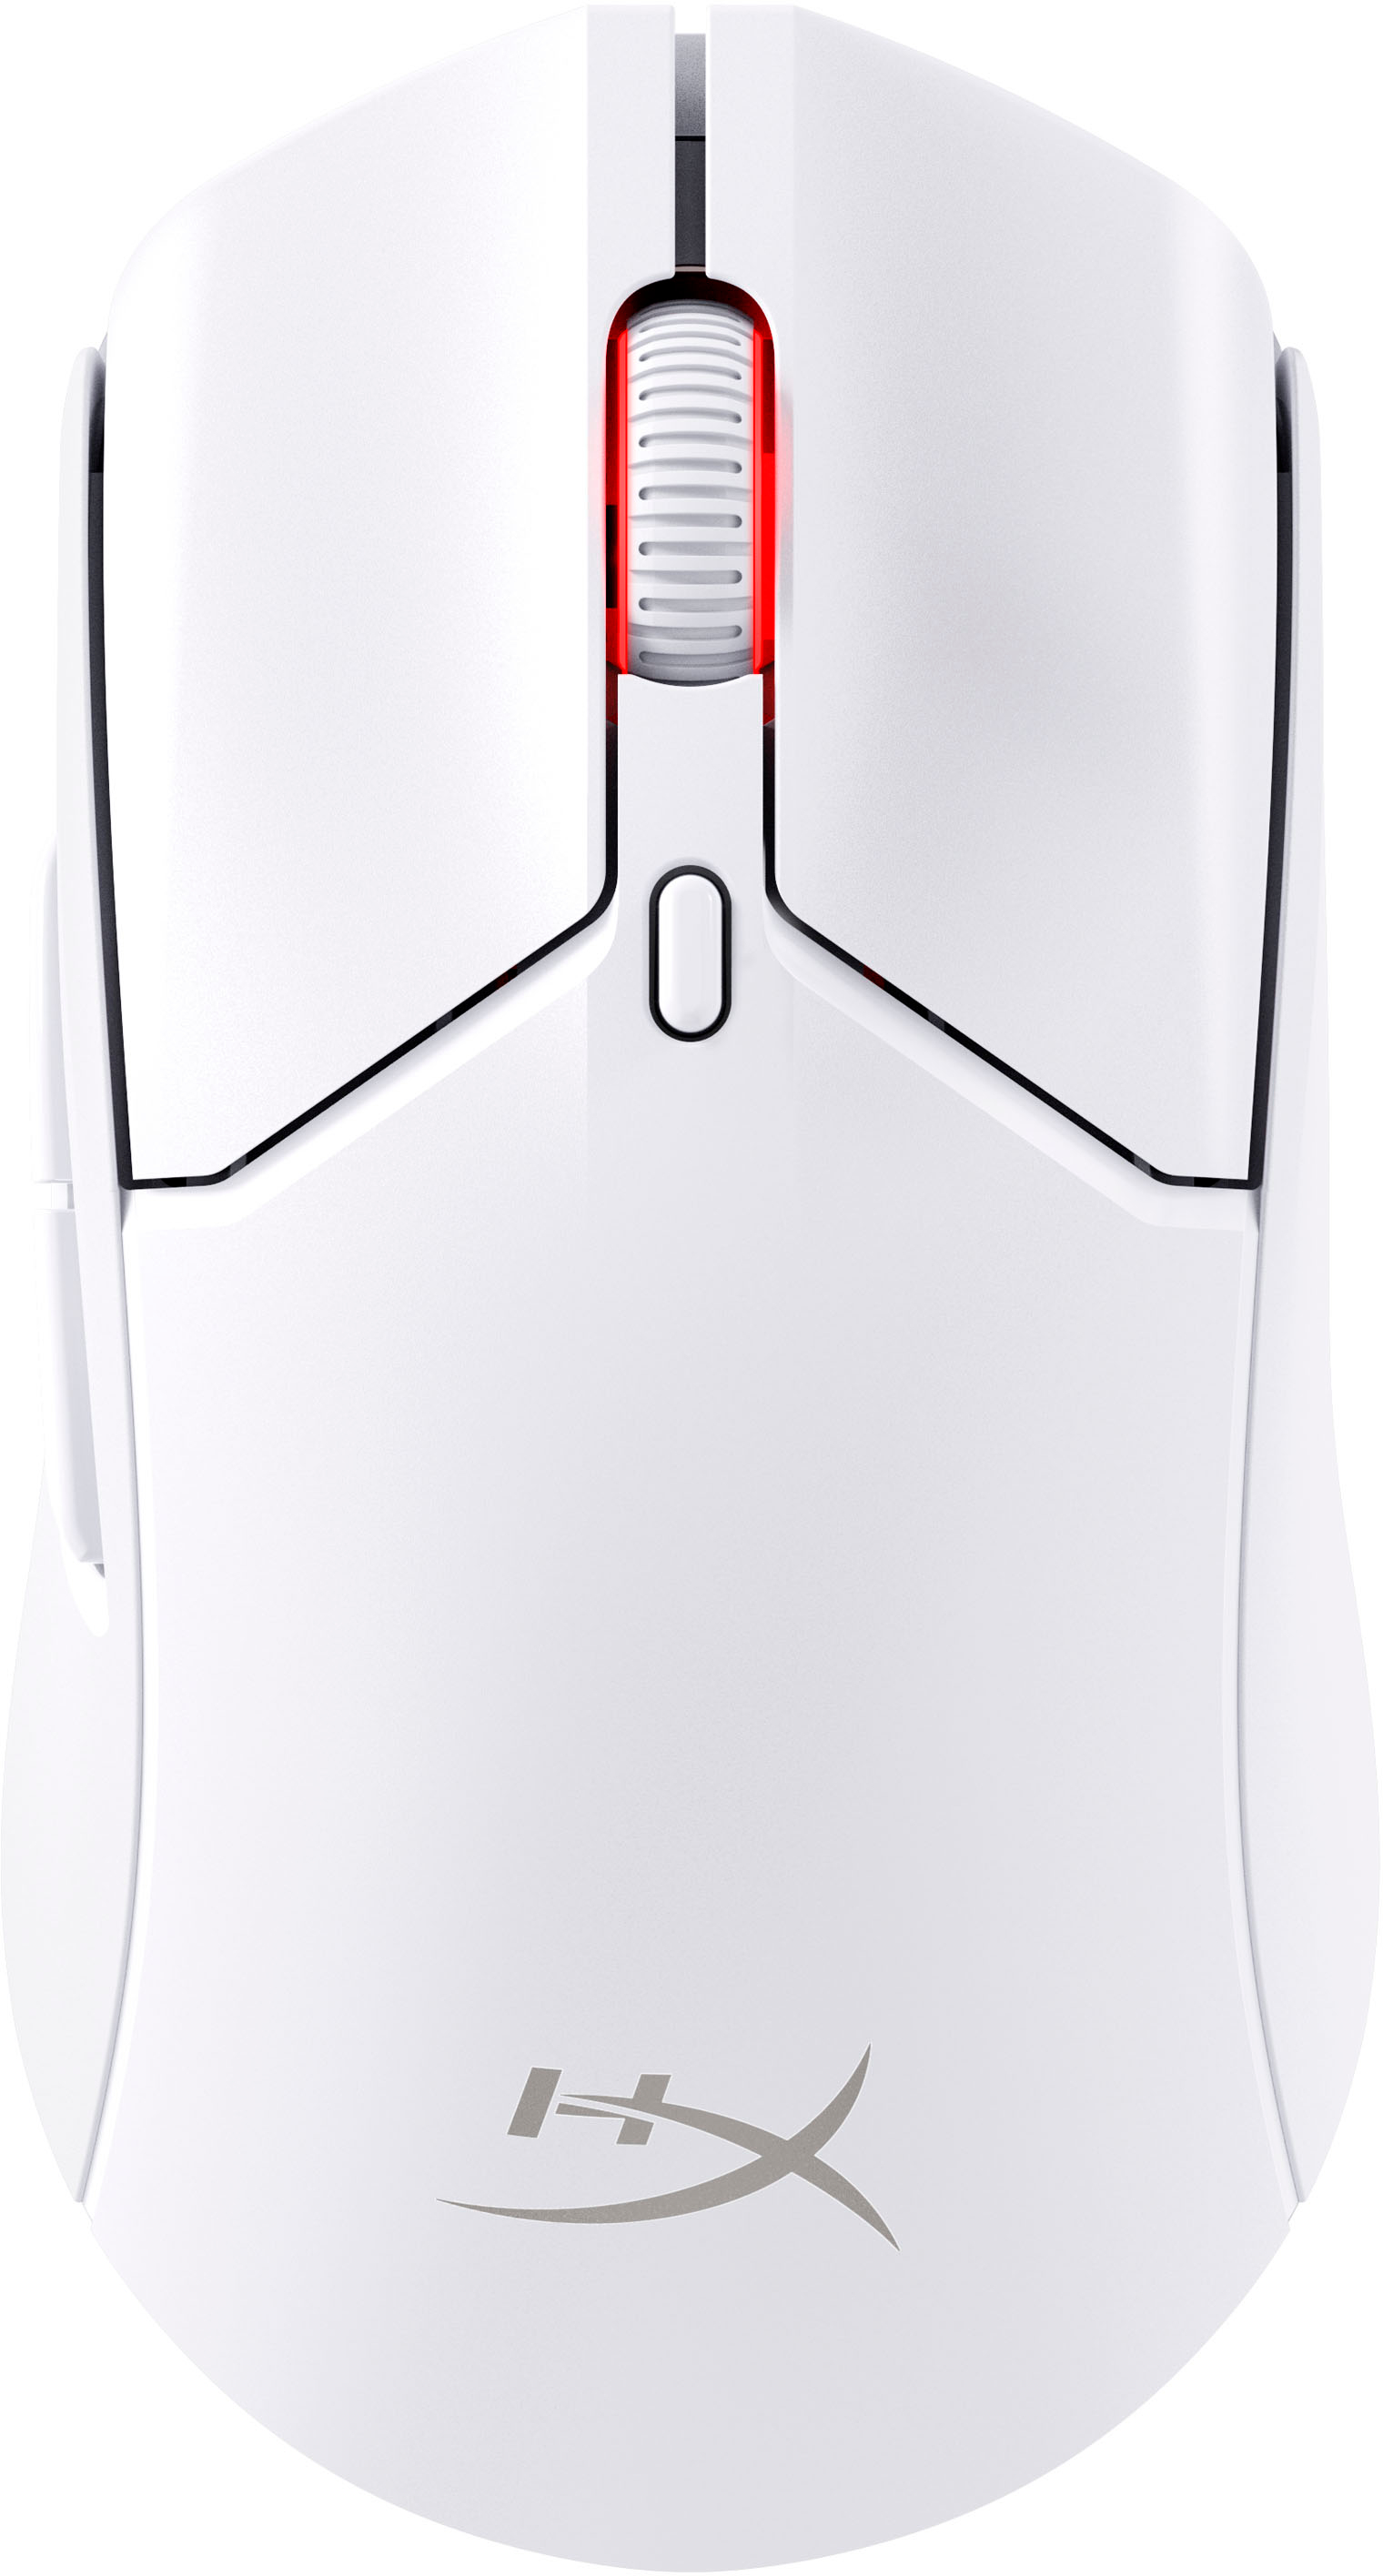 HyperX Pulsefire Haste Mouse Gaming Lightweight Buy Optical Lighting 2 - RGB Best with Wireless White 6N0A9AA